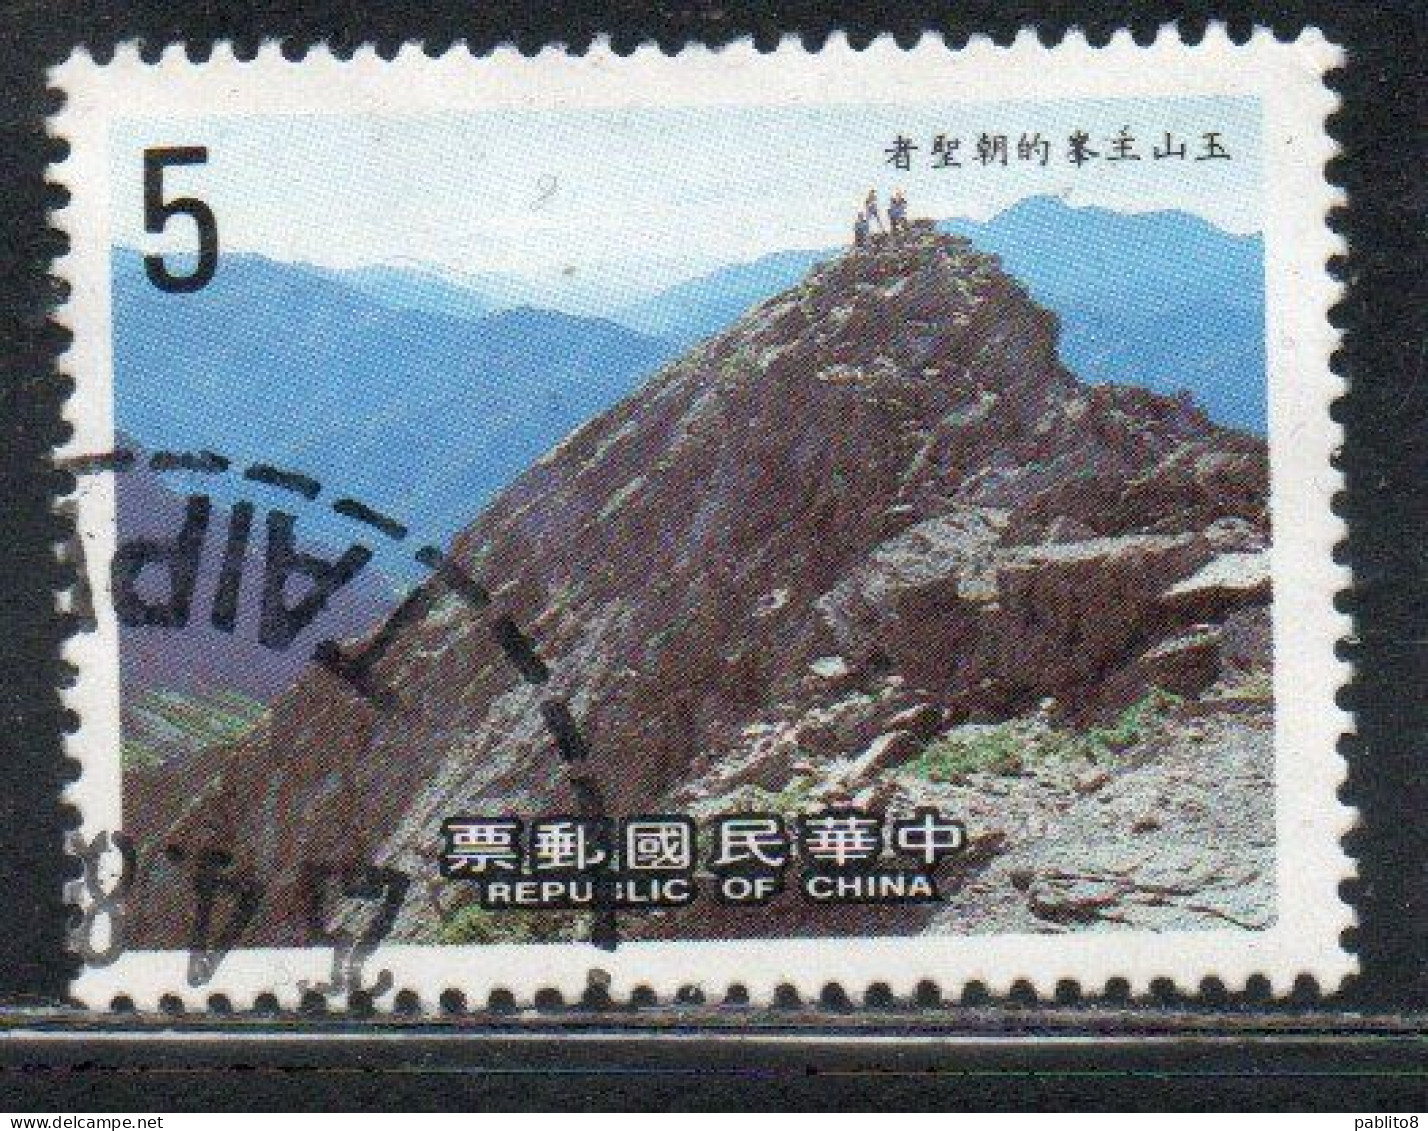 CHINA REPUBLIC CINA TAIWAN FORMOSA 1986 KENTING FIRST NATIONAL PARK SHORE ROCKS 5$ USED USATO OBLITERE' - Gebraucht